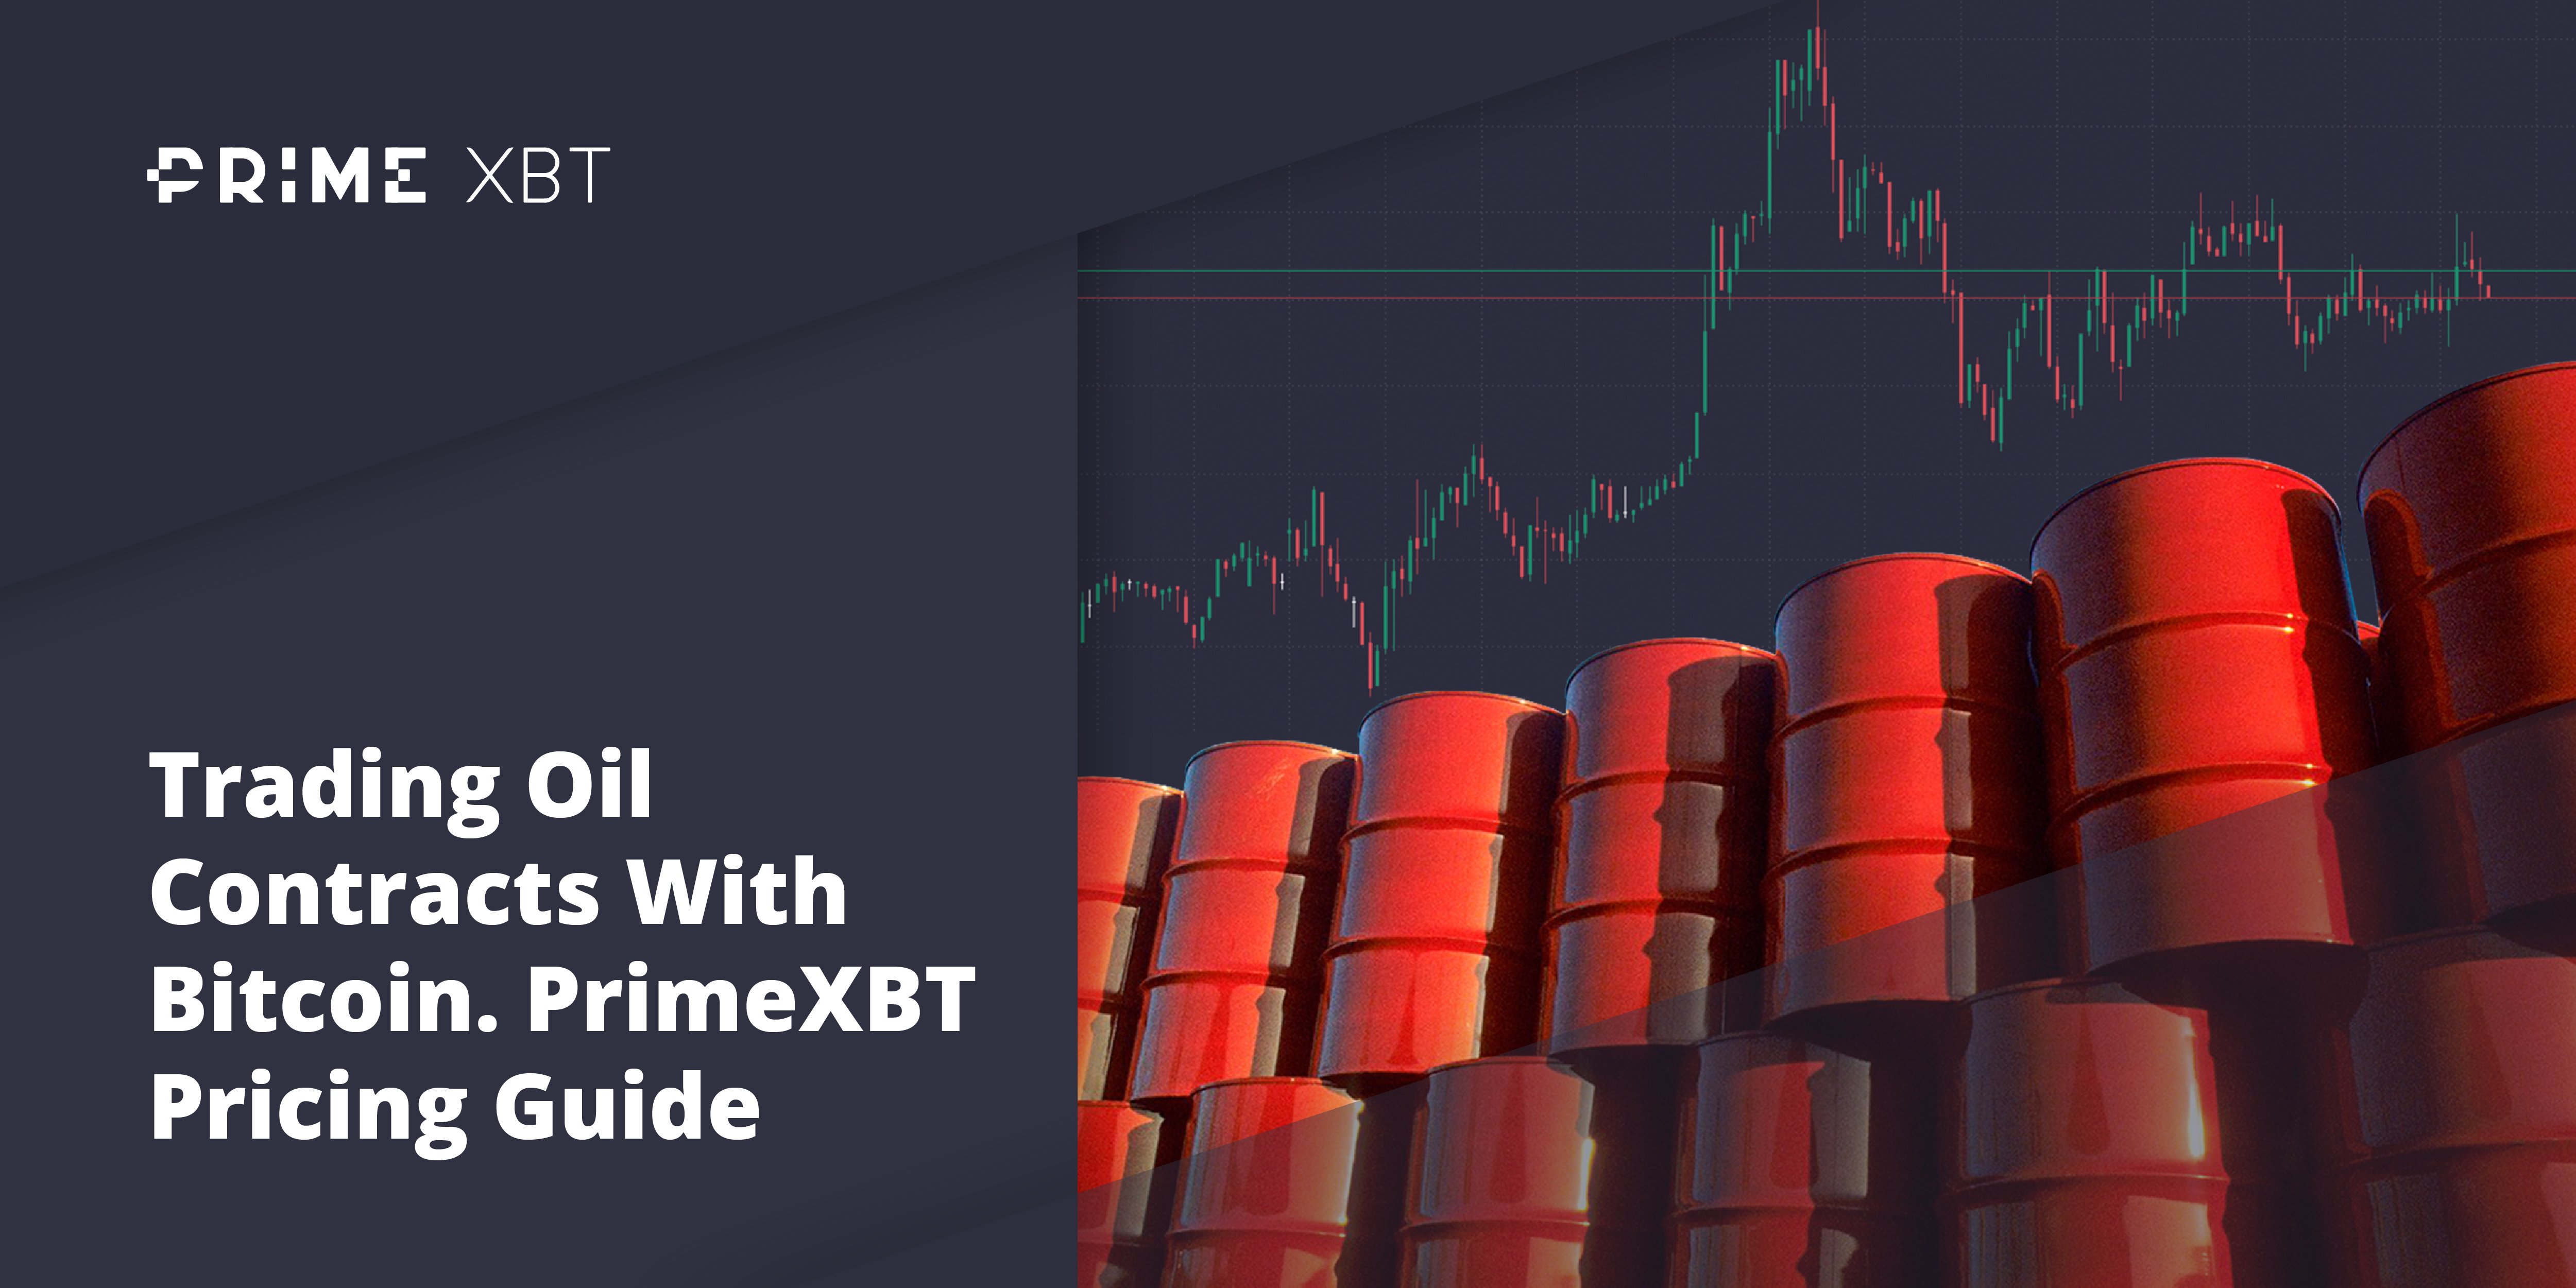 Trading Oil Contacts With Bitcoin: PrimeXBT Pricing Guide - 2020 04 23 18.12.11